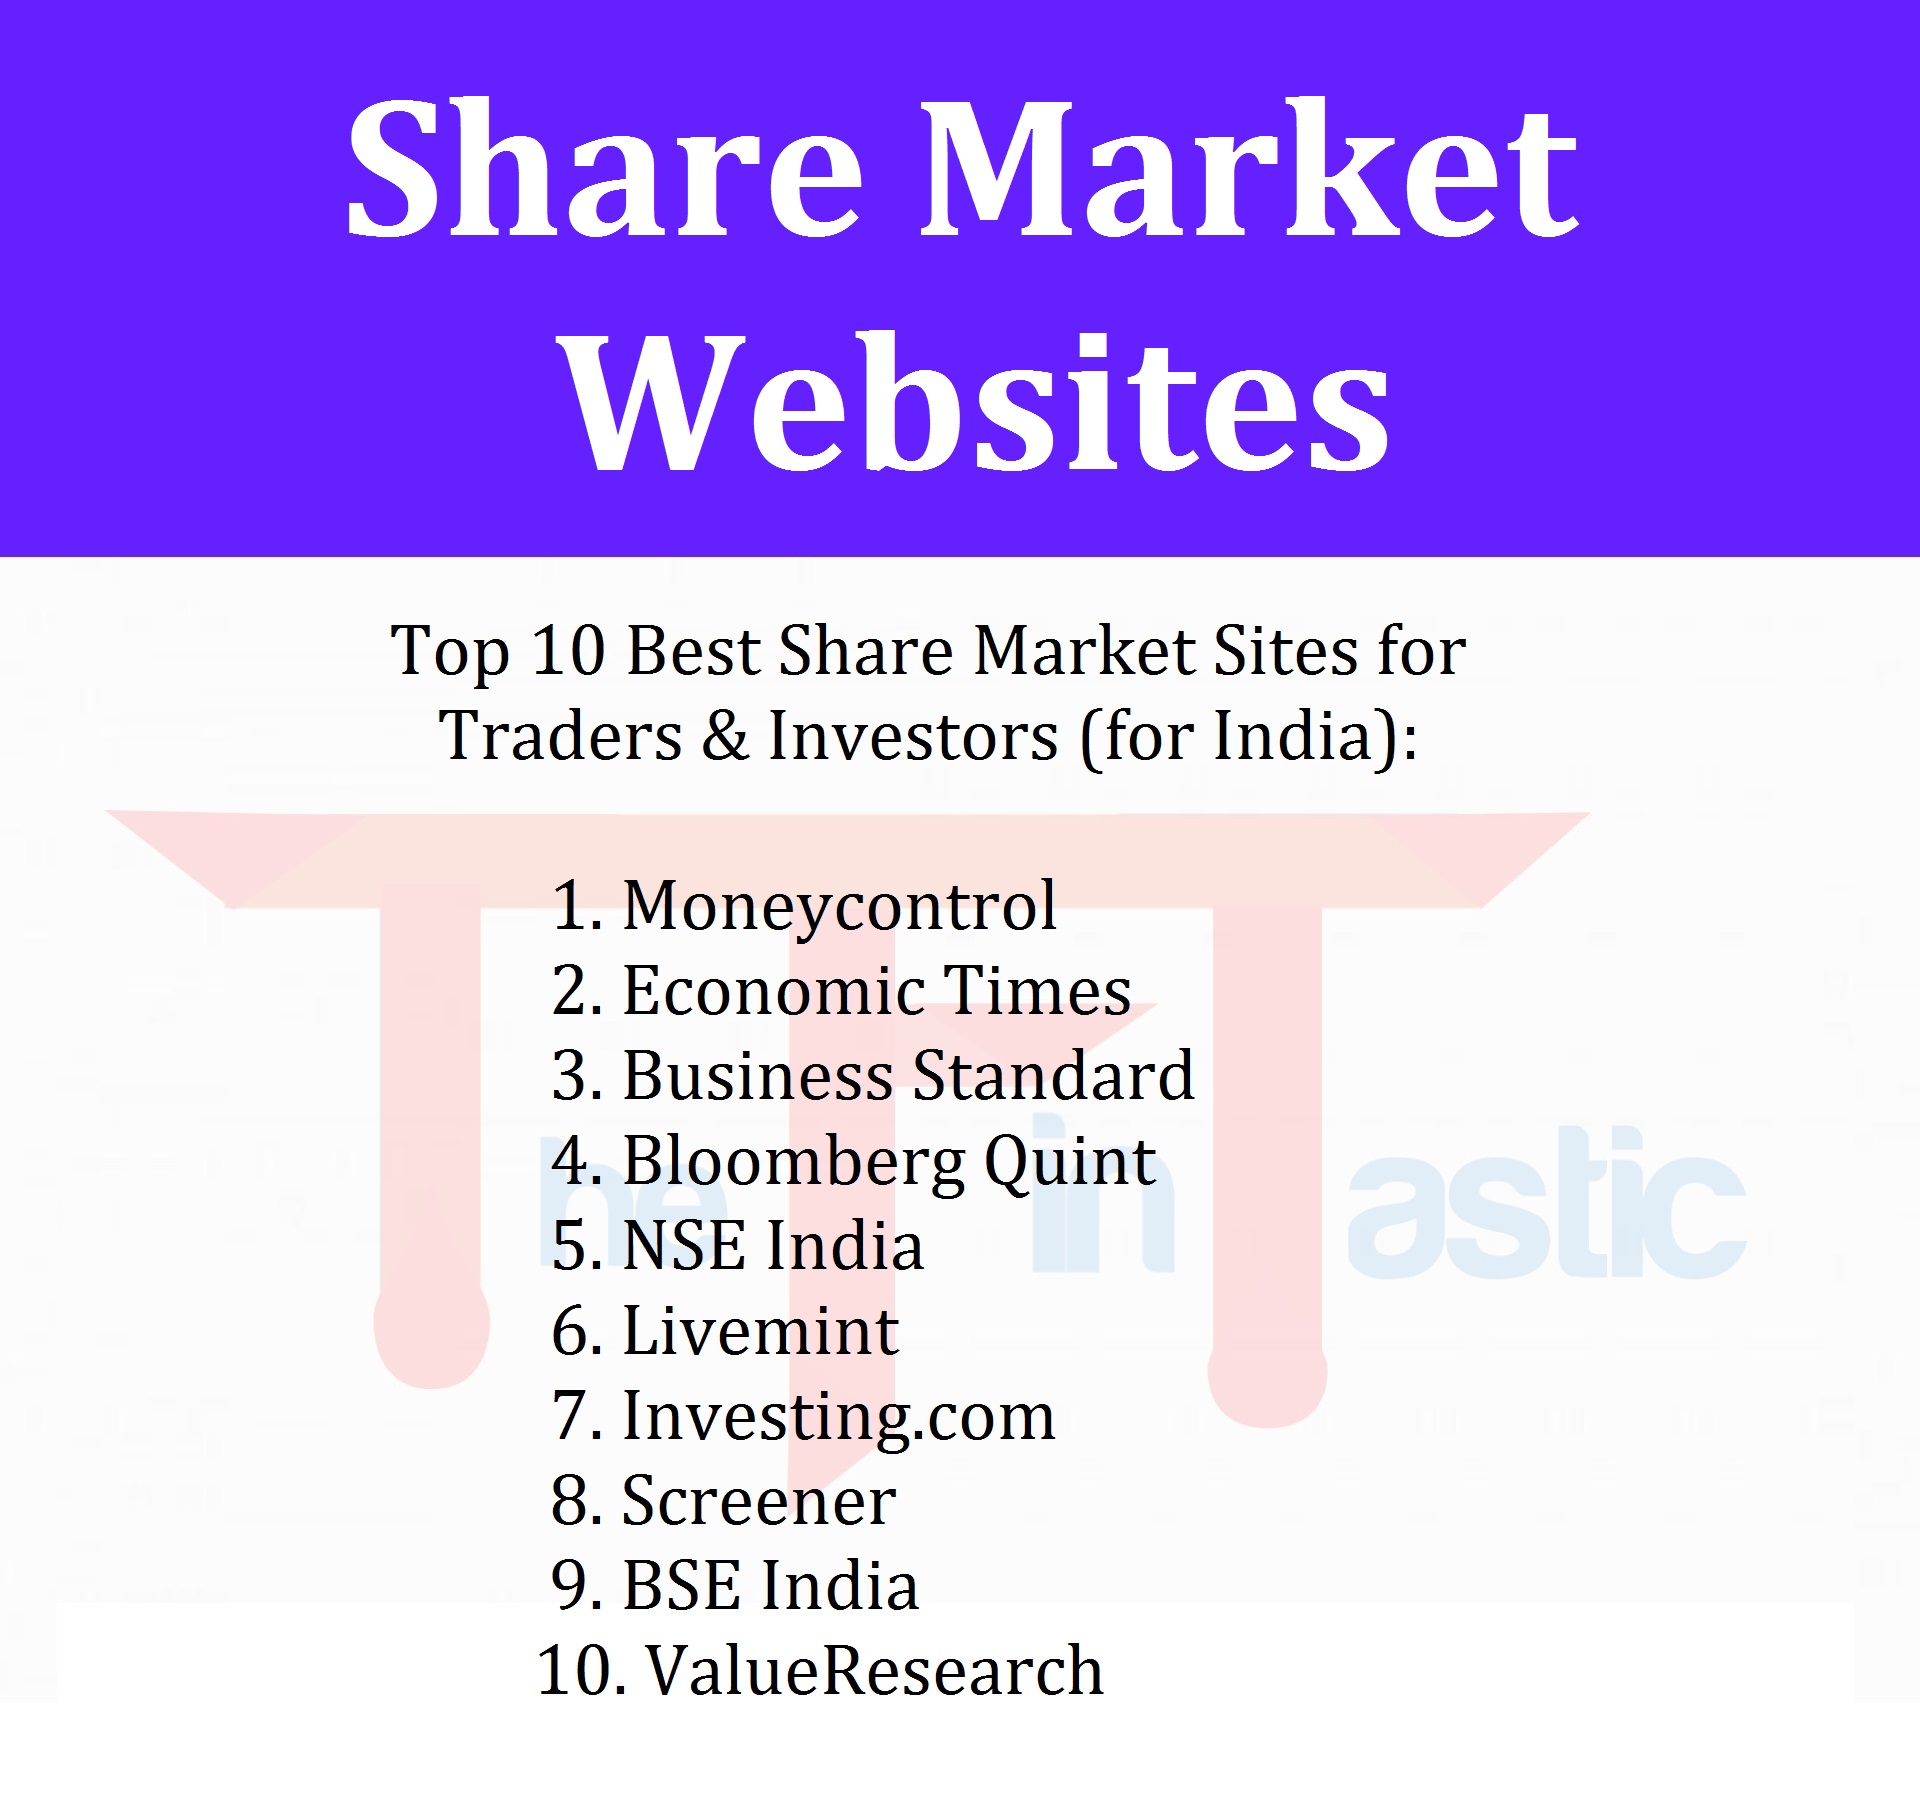 Top 10 Best Share Market Sites for Traders and Investors (for India)